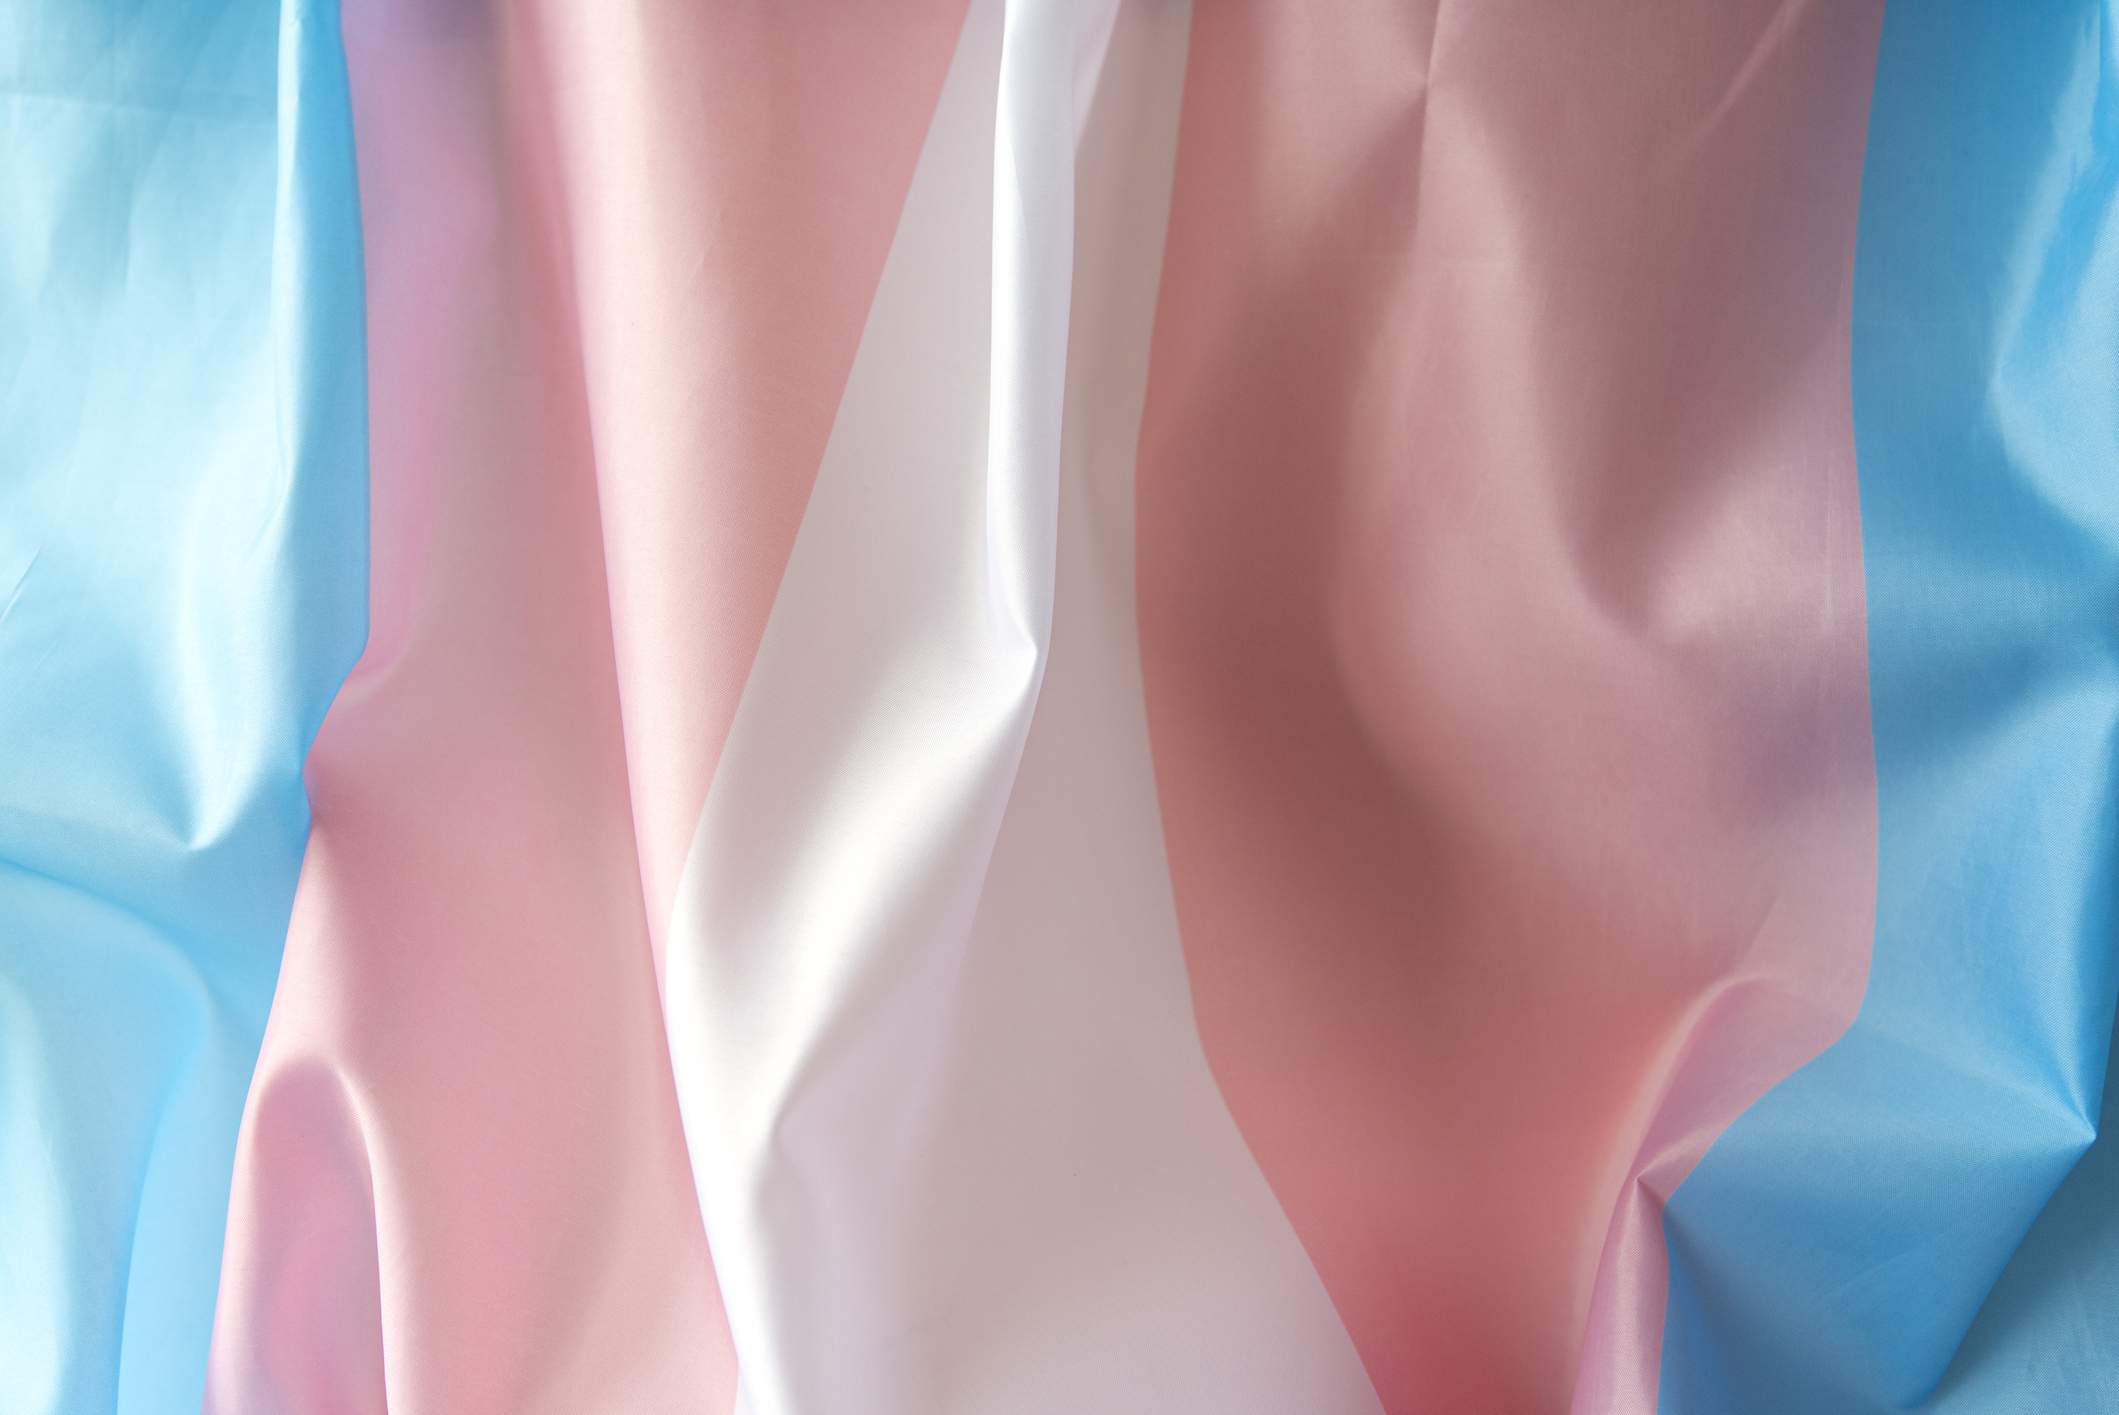 Up-close image of the trans flag